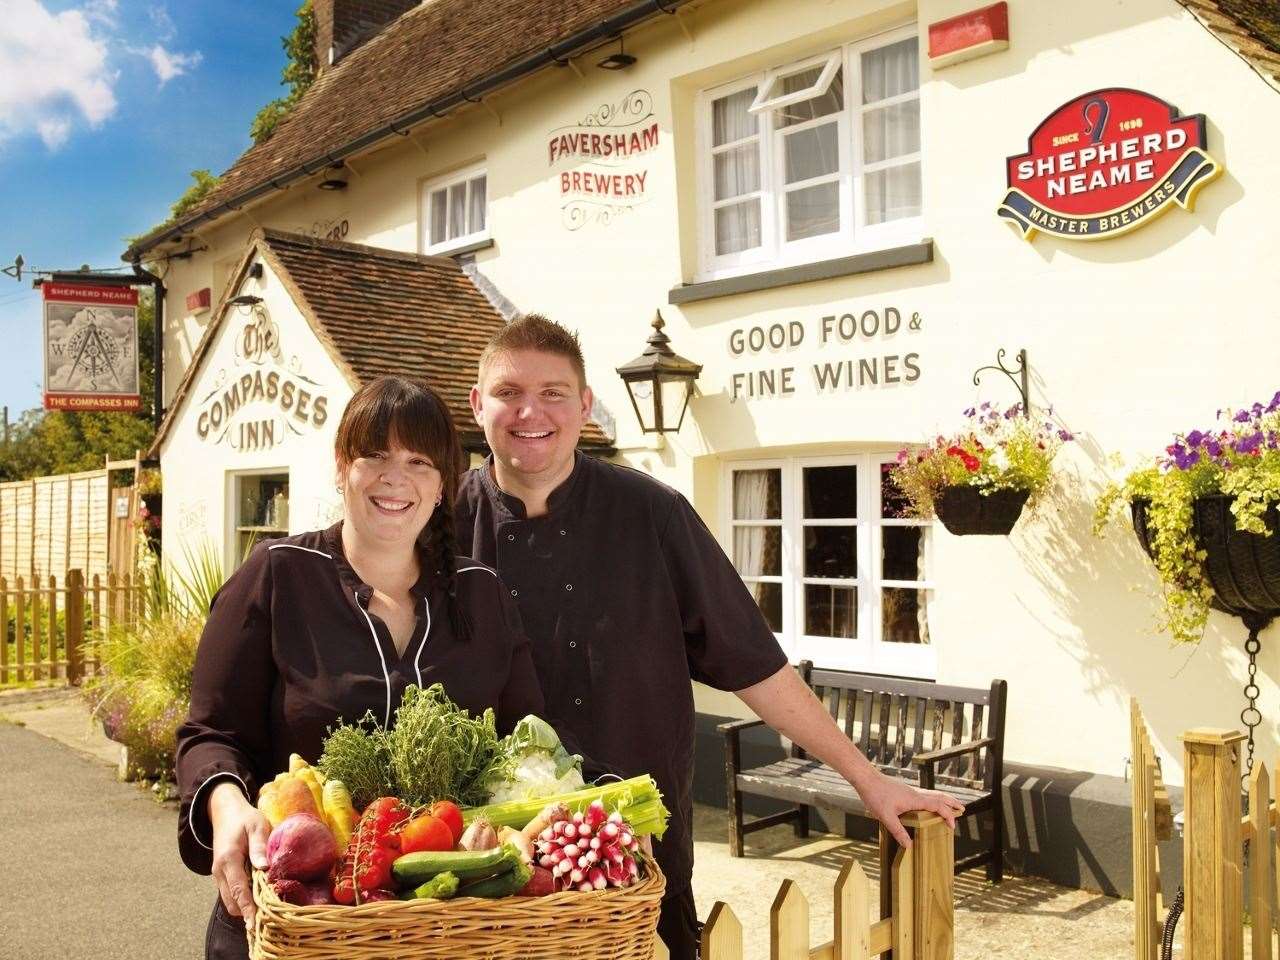 Under former tenants Donna and Rob Taylor - who left in 2021 - the pub was awarded a Bib Gourmand award from the Michelin Guide